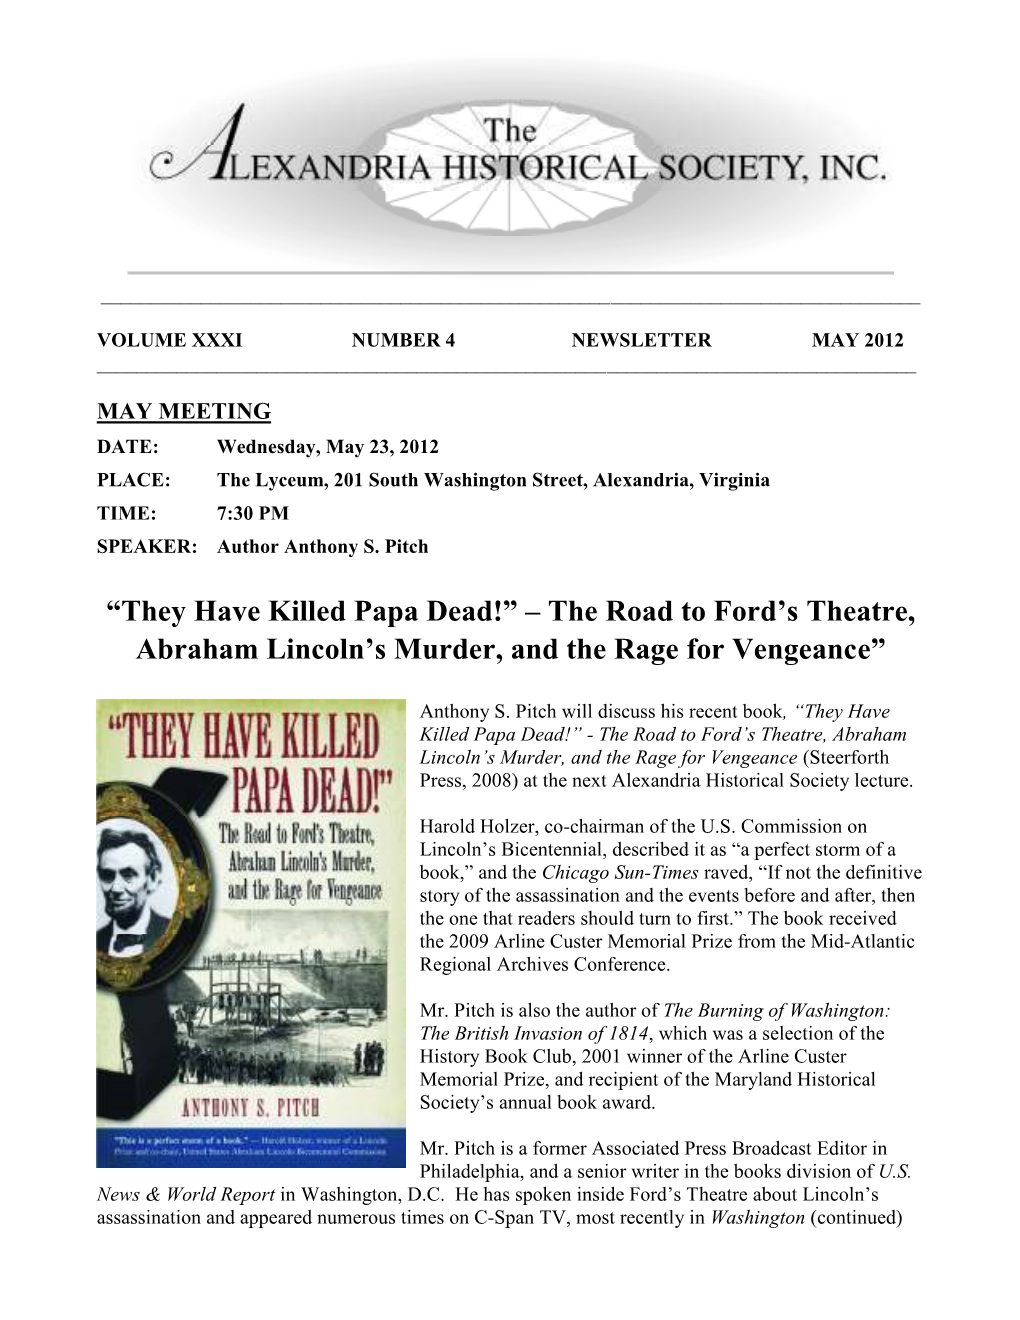 They Have Killed Papa Dead!” – the Road to Ford's Theatre, Abraham Lincoln's Murder, and the Rage for Vengeance